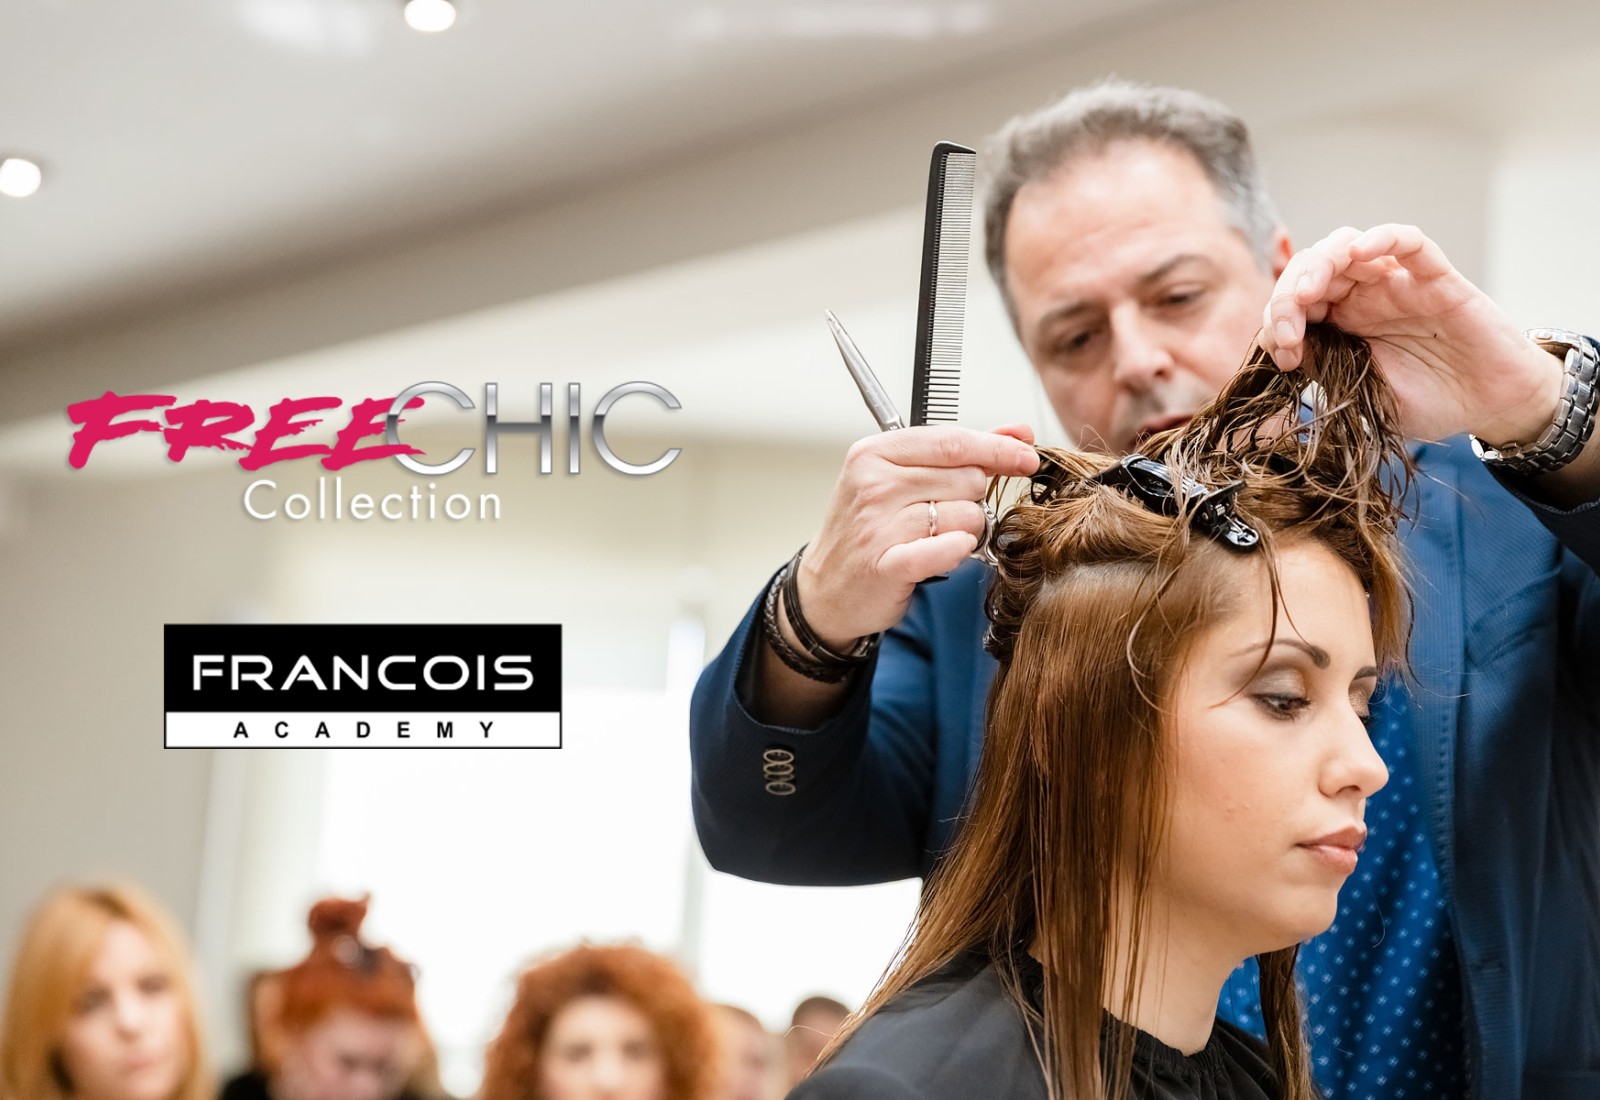 Freechic Collection presented by Francois Academy in Alexandroupoli